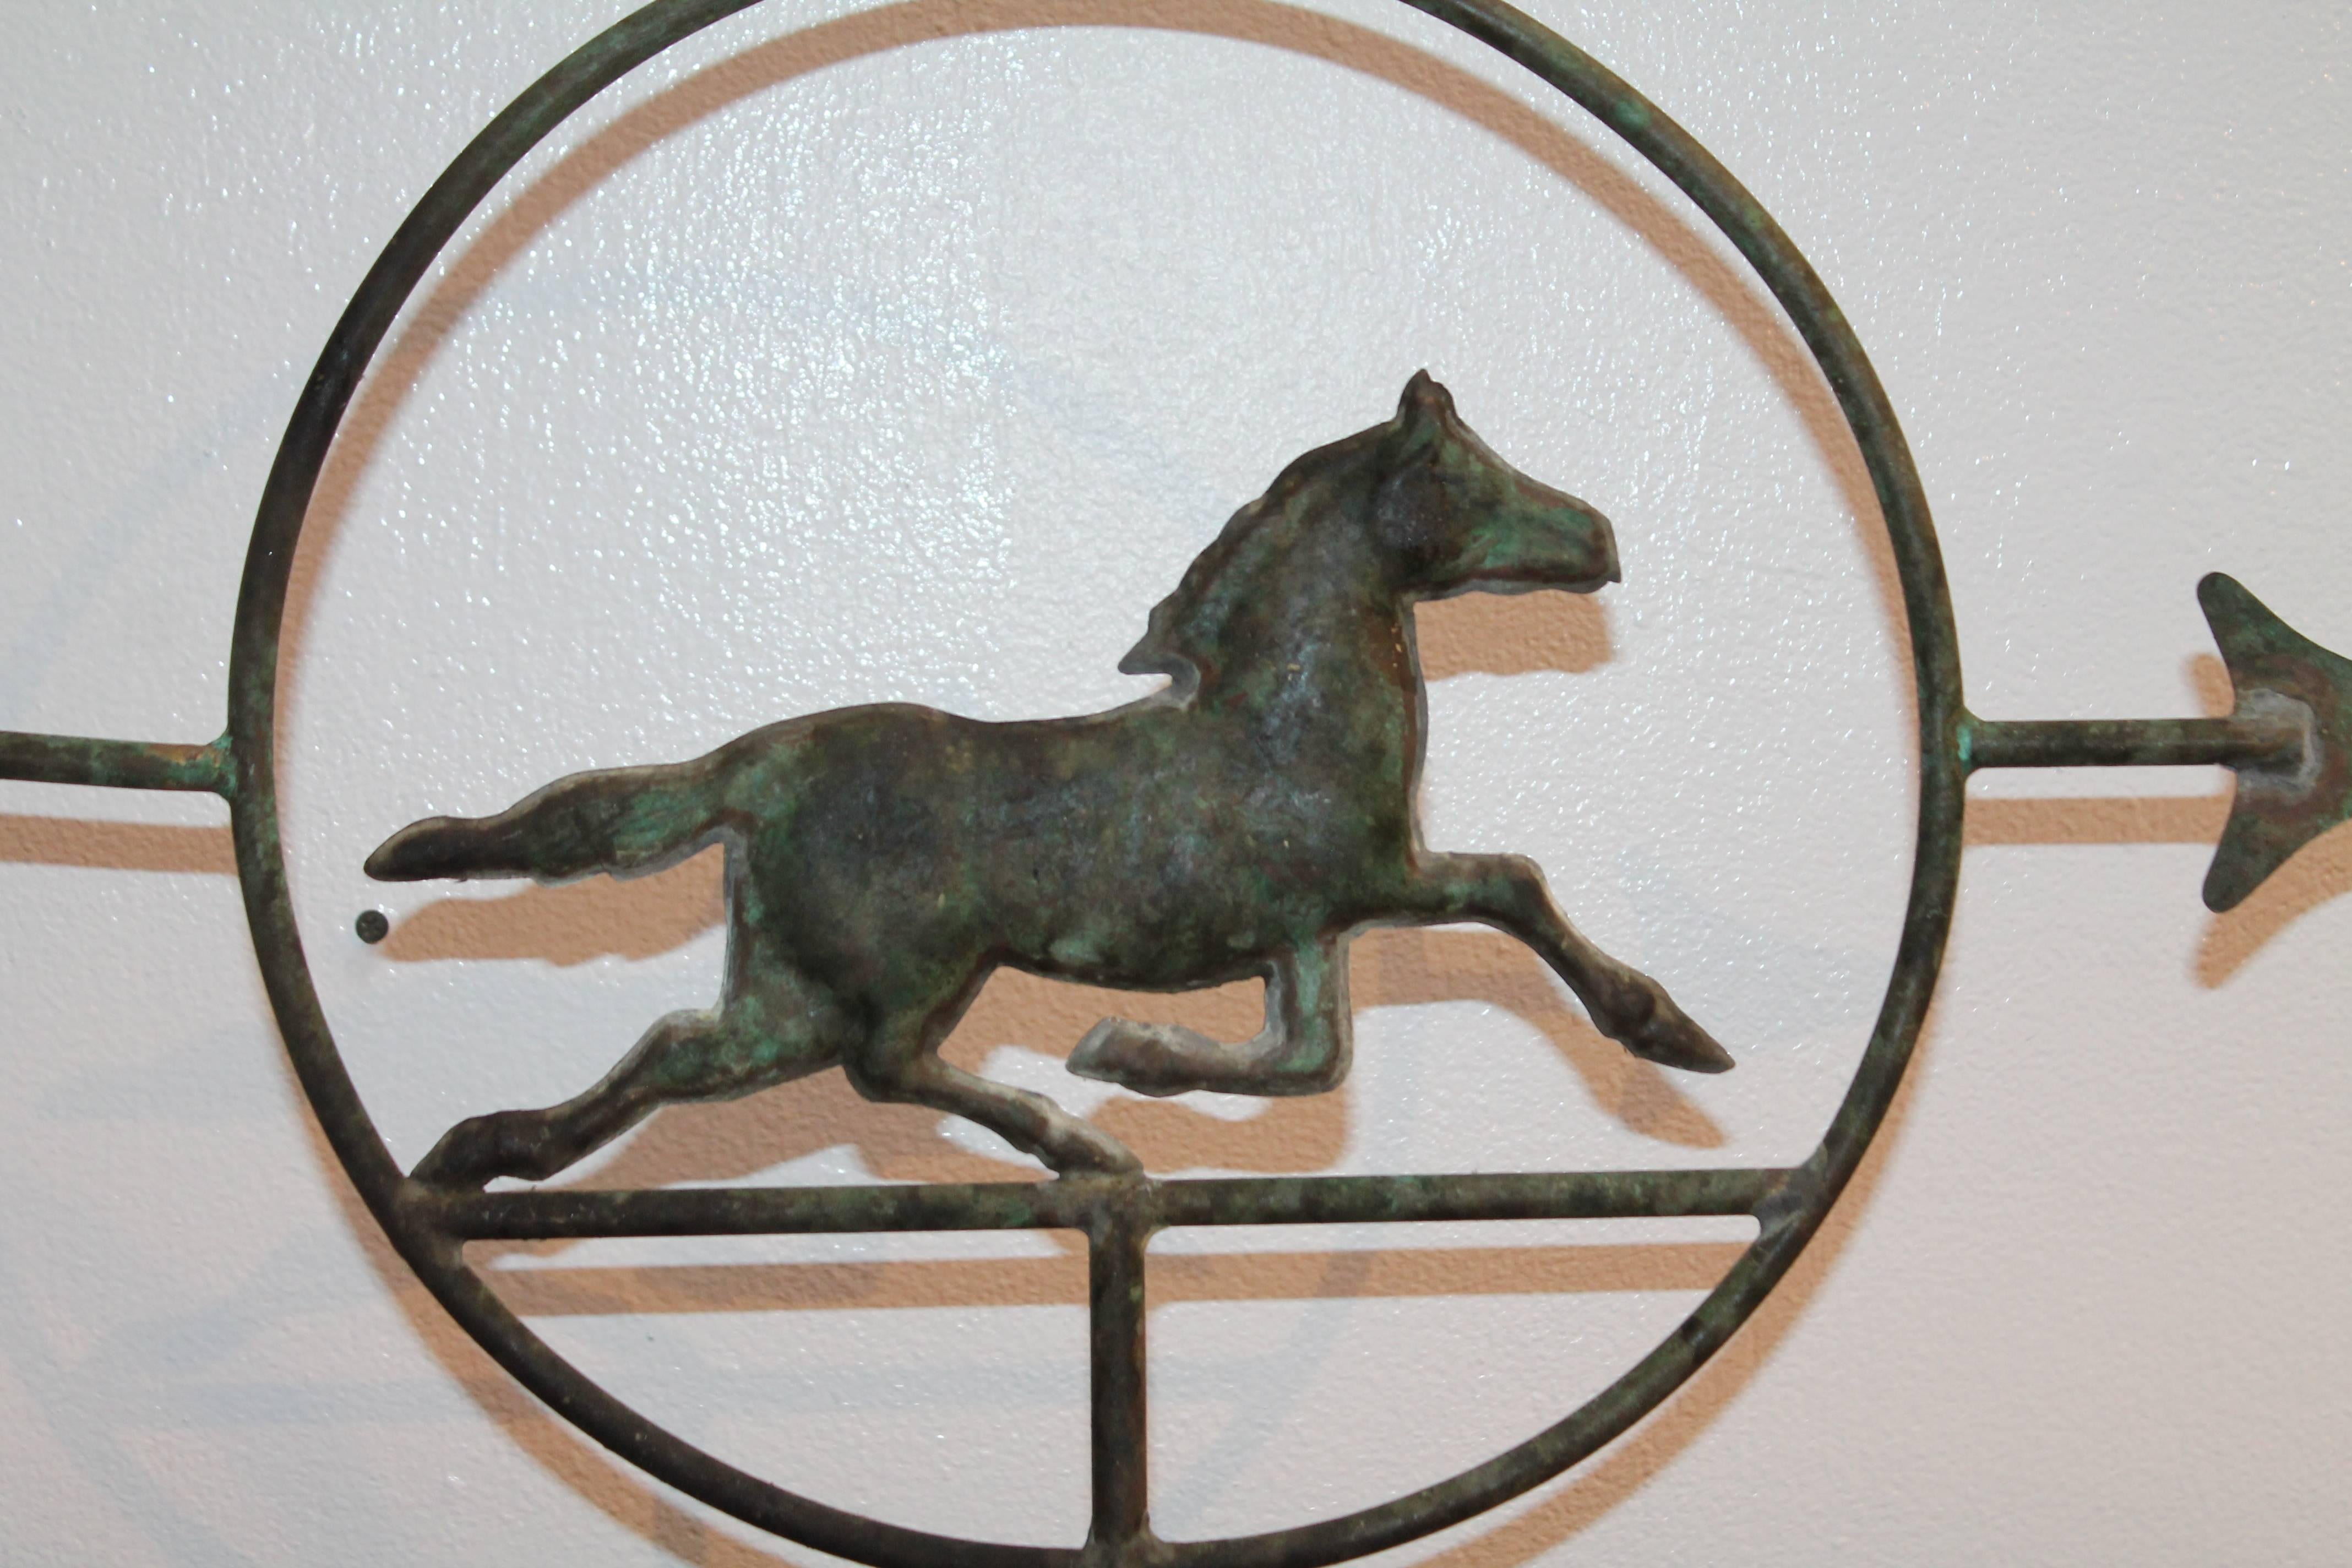 This custom-made cast iron mounted copper running horse weathervane is a diminutive horse within the circle and arrow is in wonderful as found condition. This late 19th century horse retains a great aged patinaed surface. The entire weather vane is